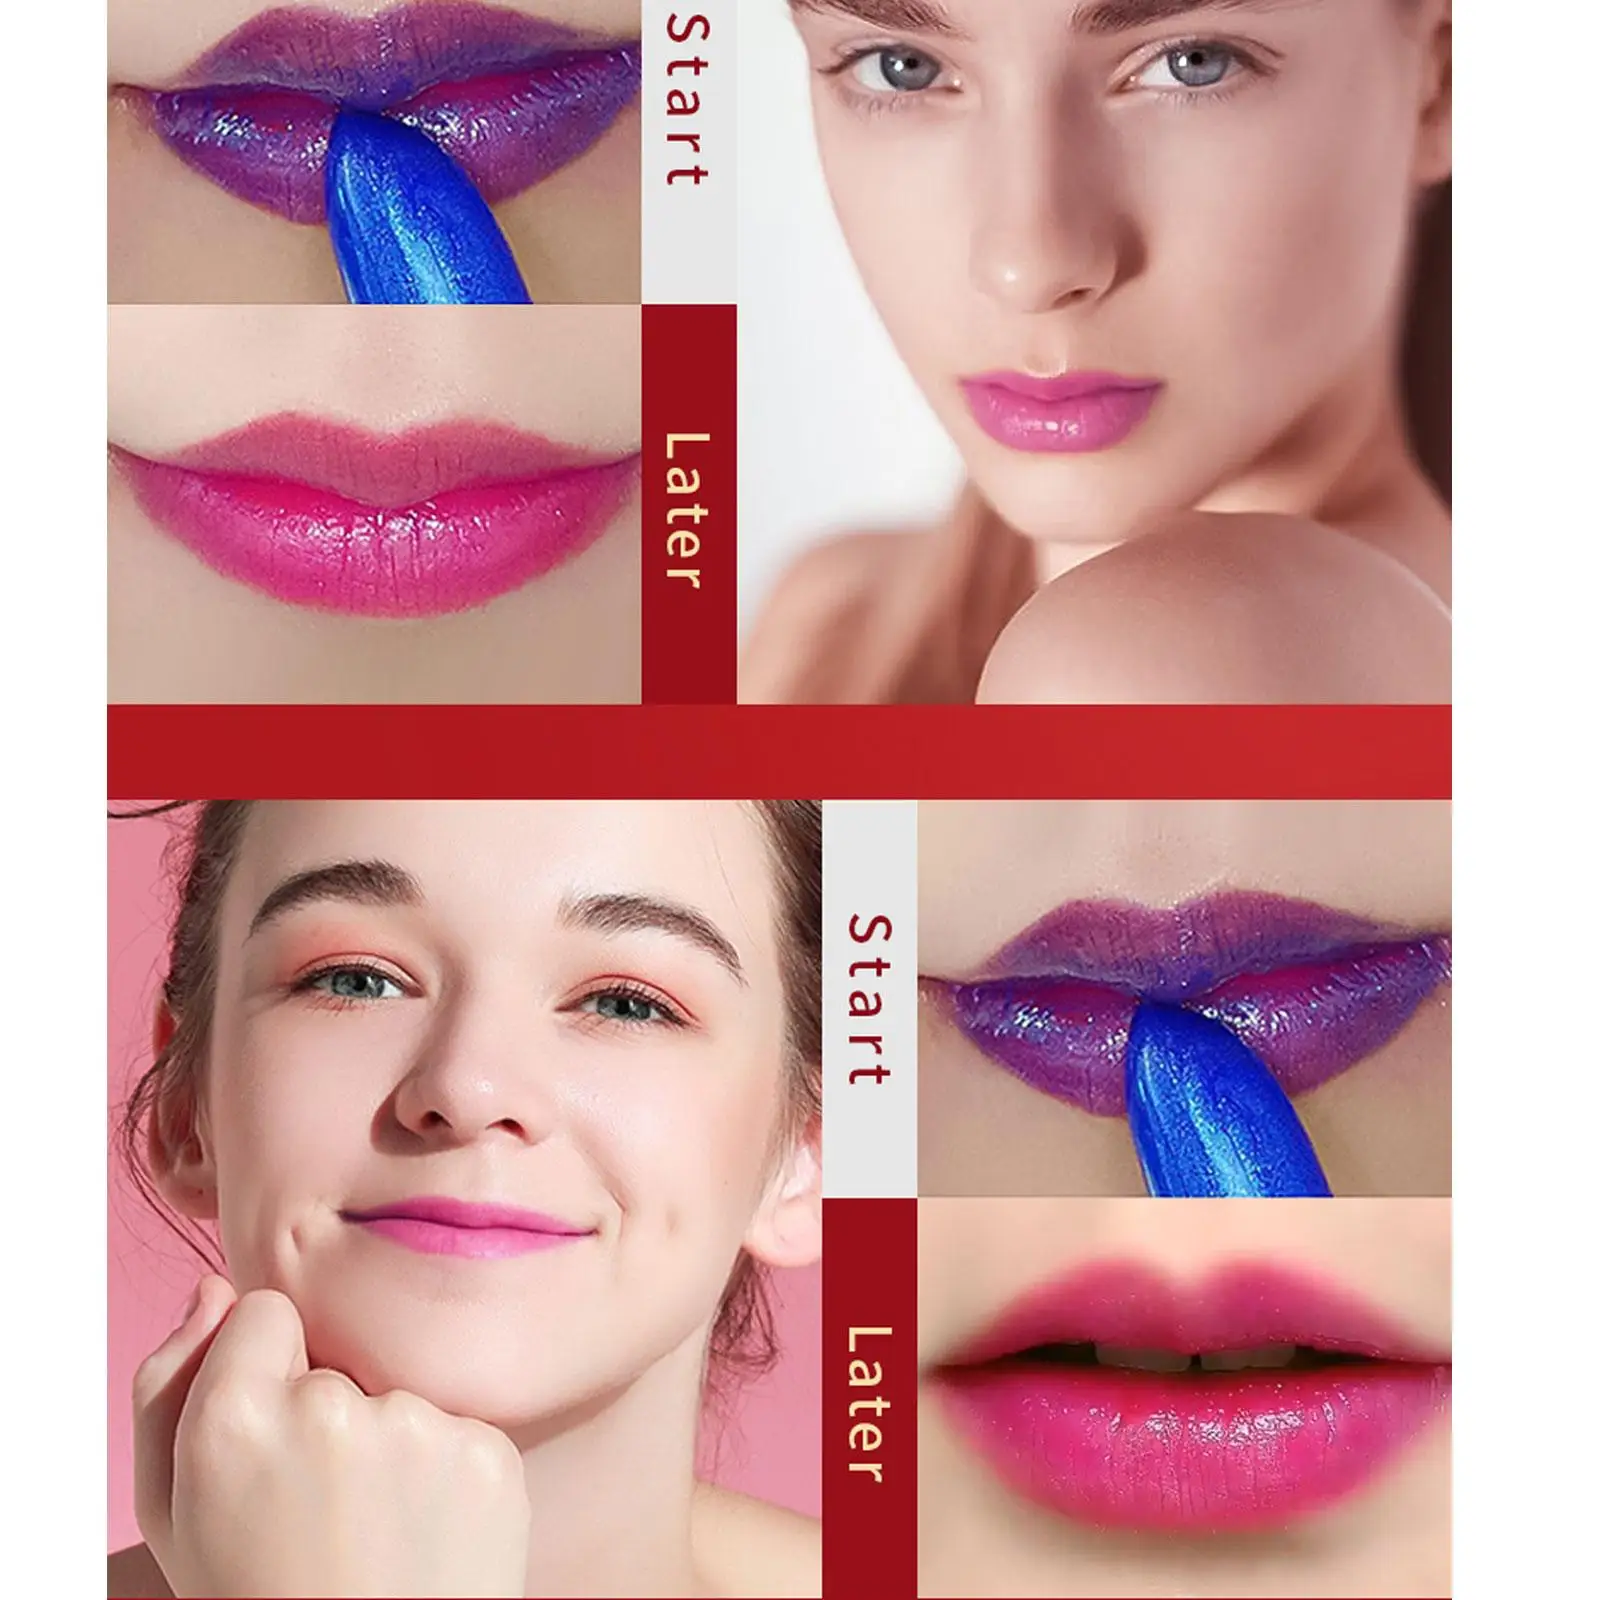 Blue Rose Lip Temperature Color Changing Natural Long Lasting Waterproof Lipstick Lip Stain Gloss Moisturizing Woman Makeup images - 6